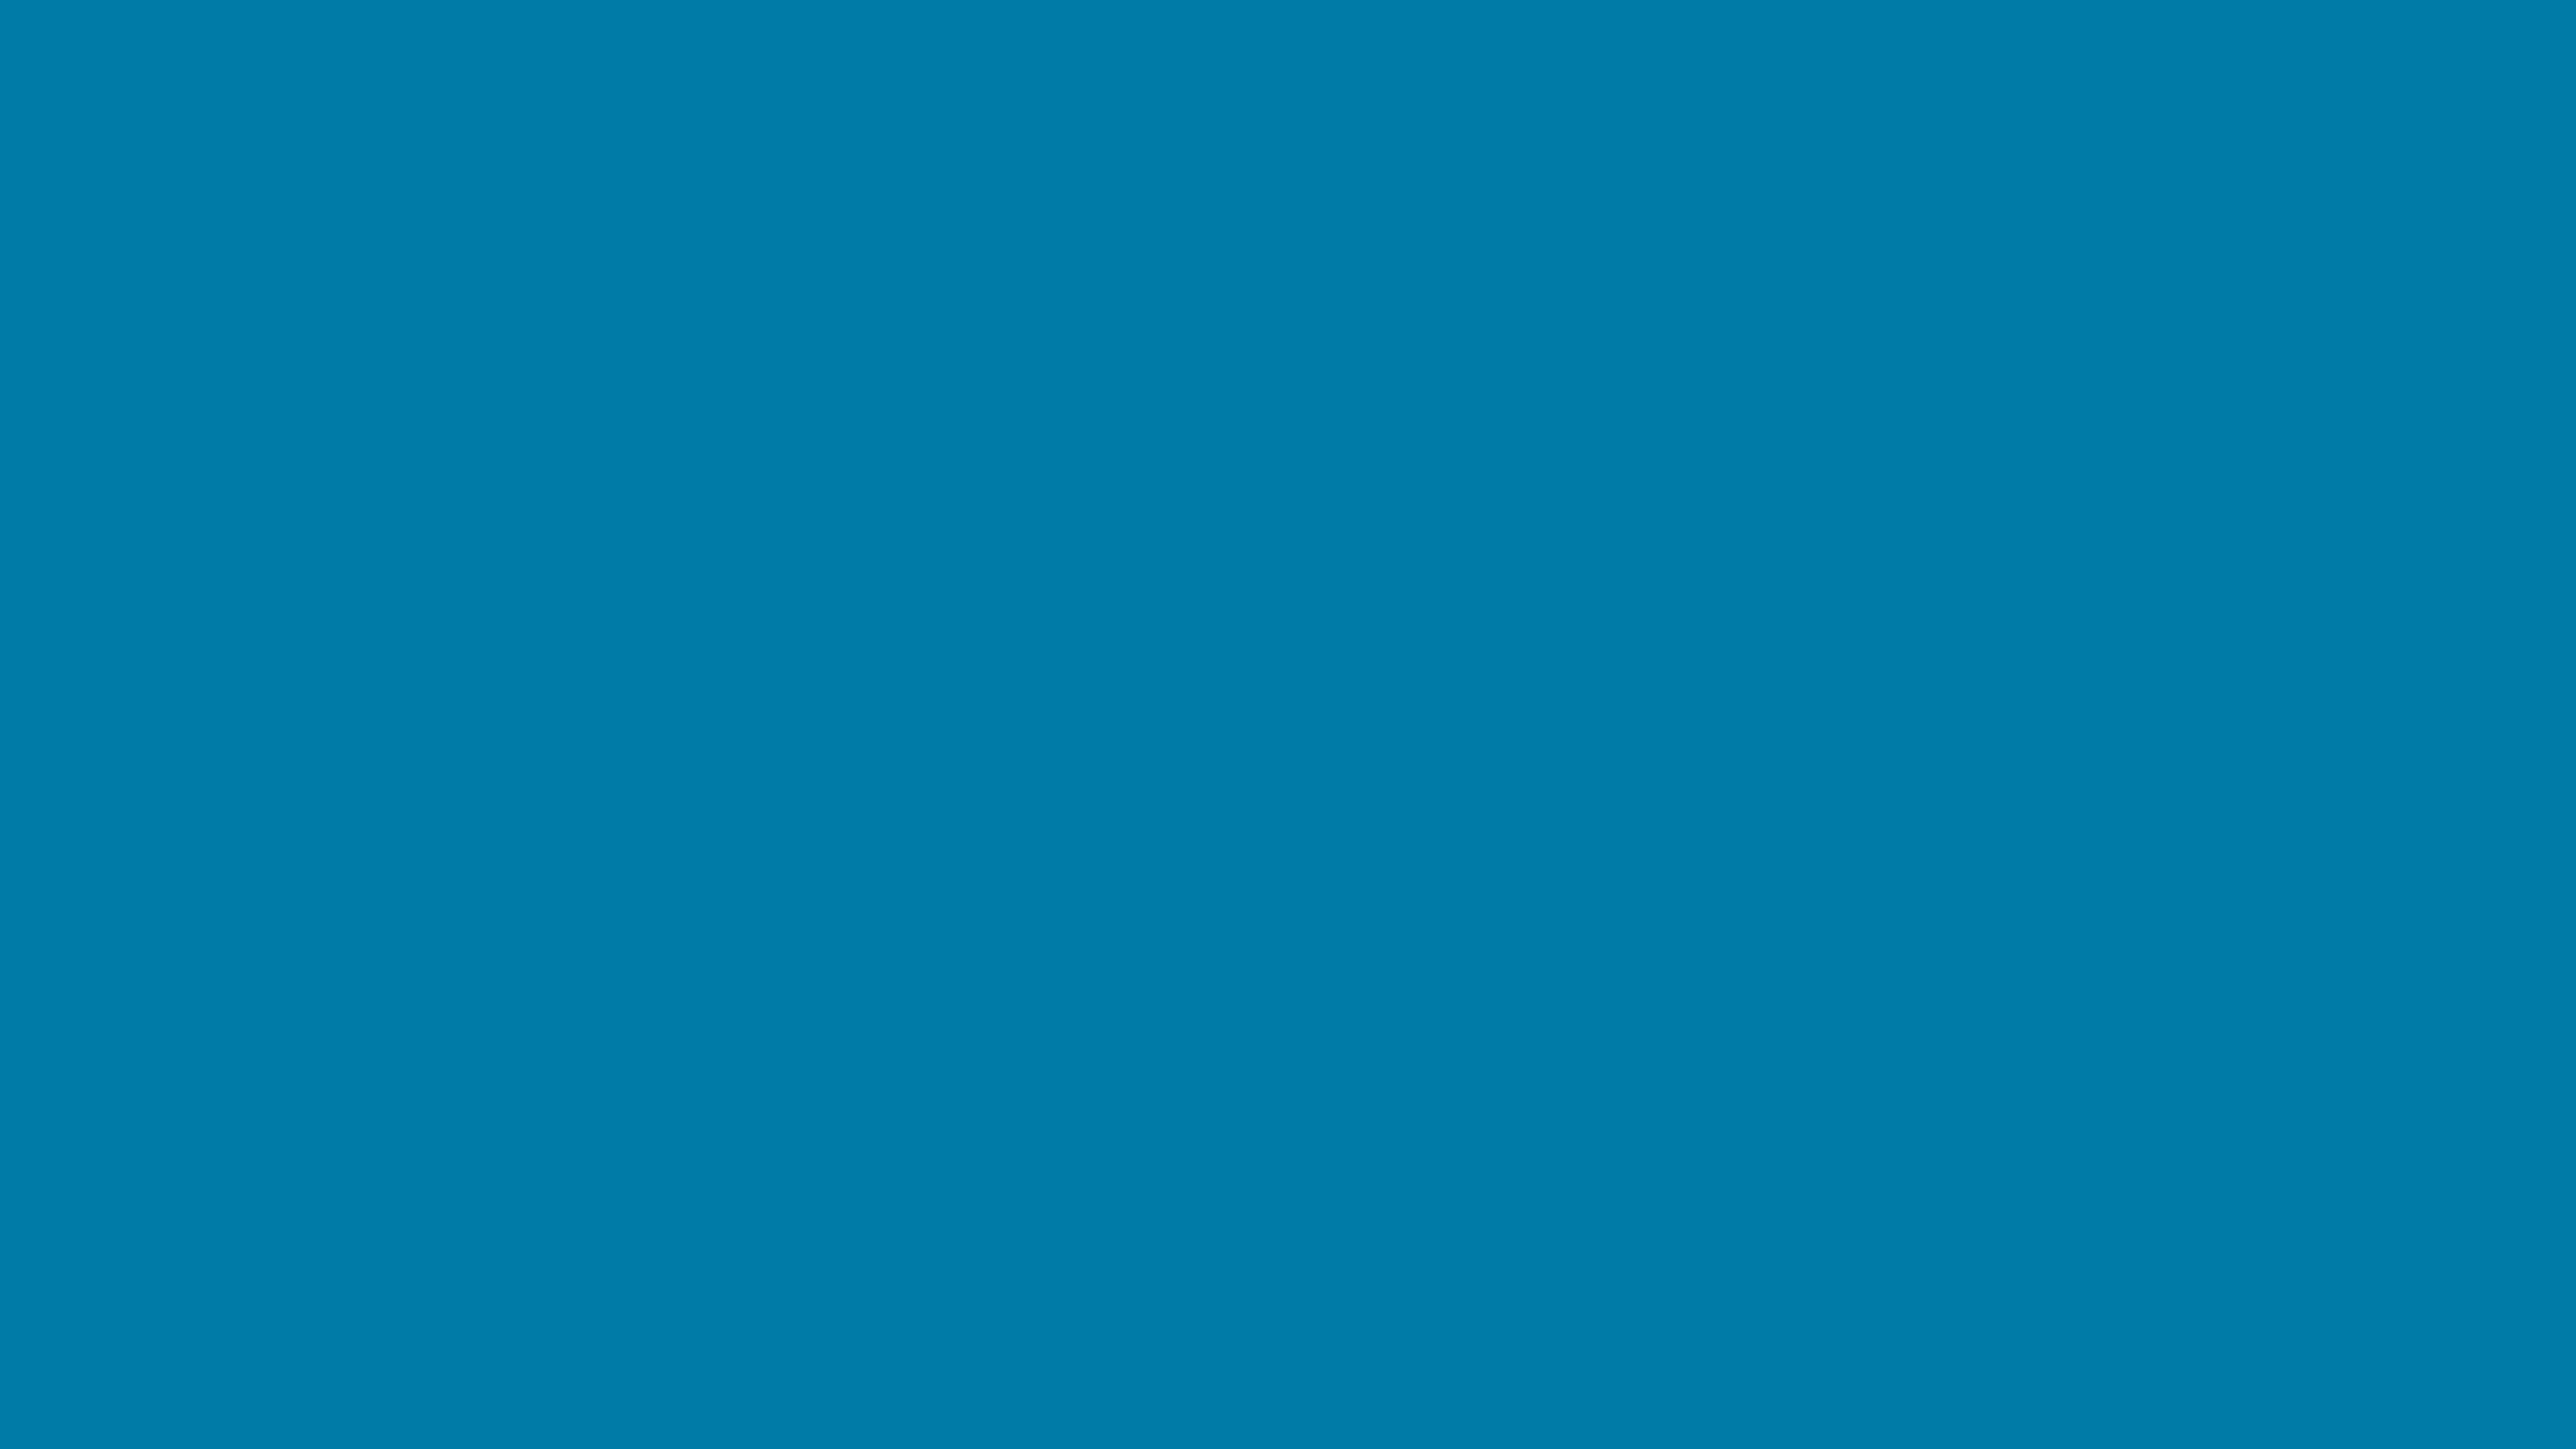 7680x4320 Cerulean Solid Color Background